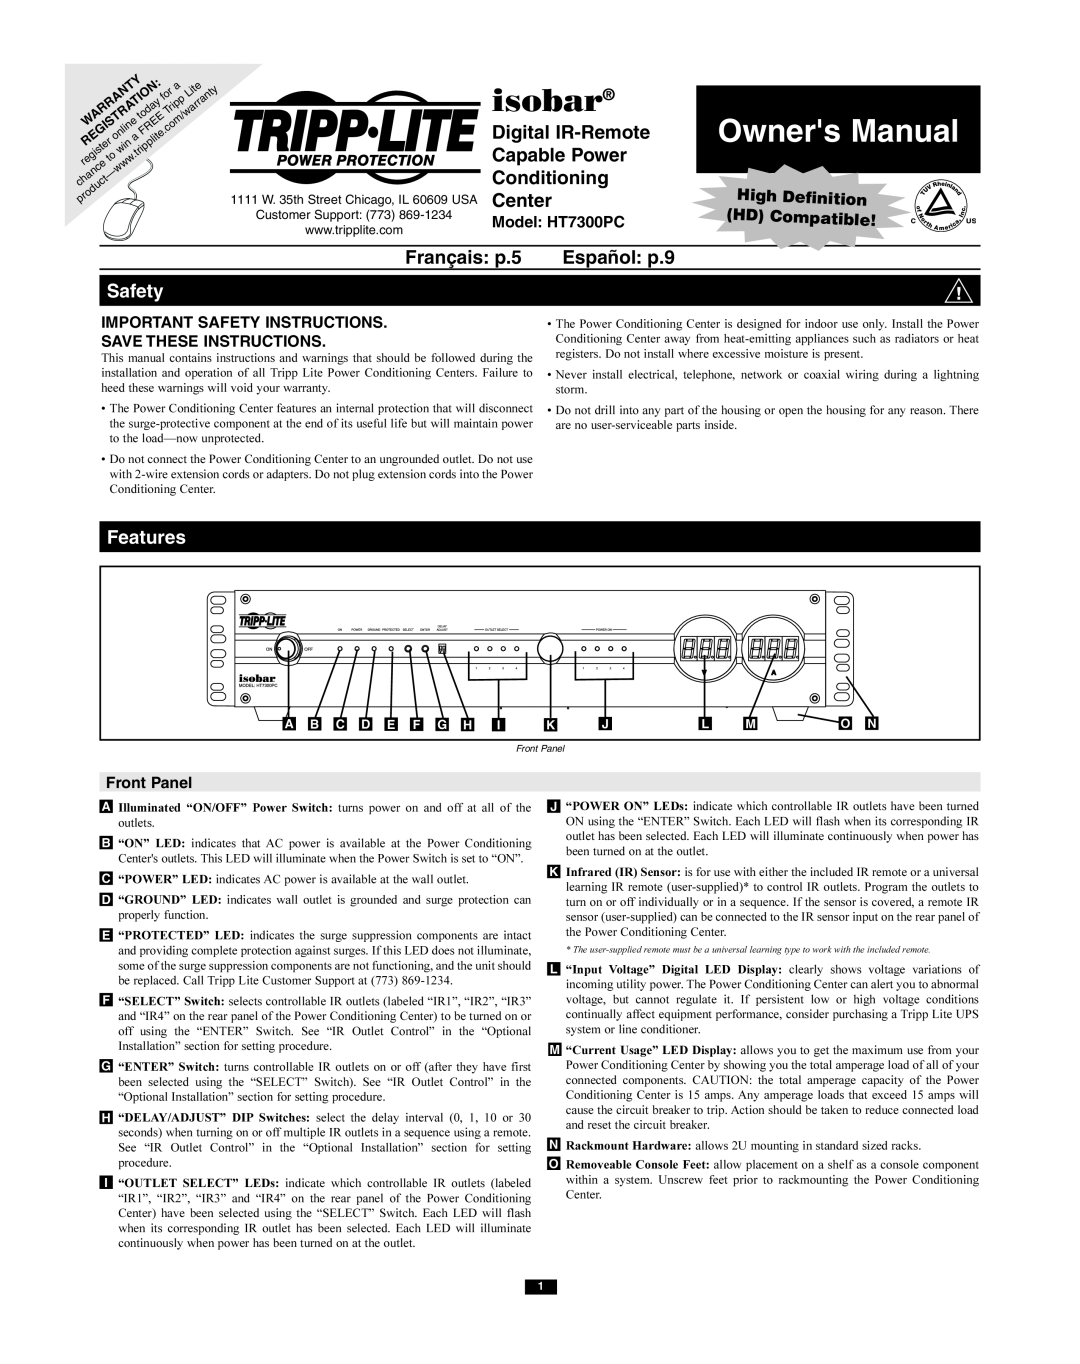 Tripp Lite owner manual Features, Model HT7300PC, Important Safety Instructions Save These Instructions, isobar 